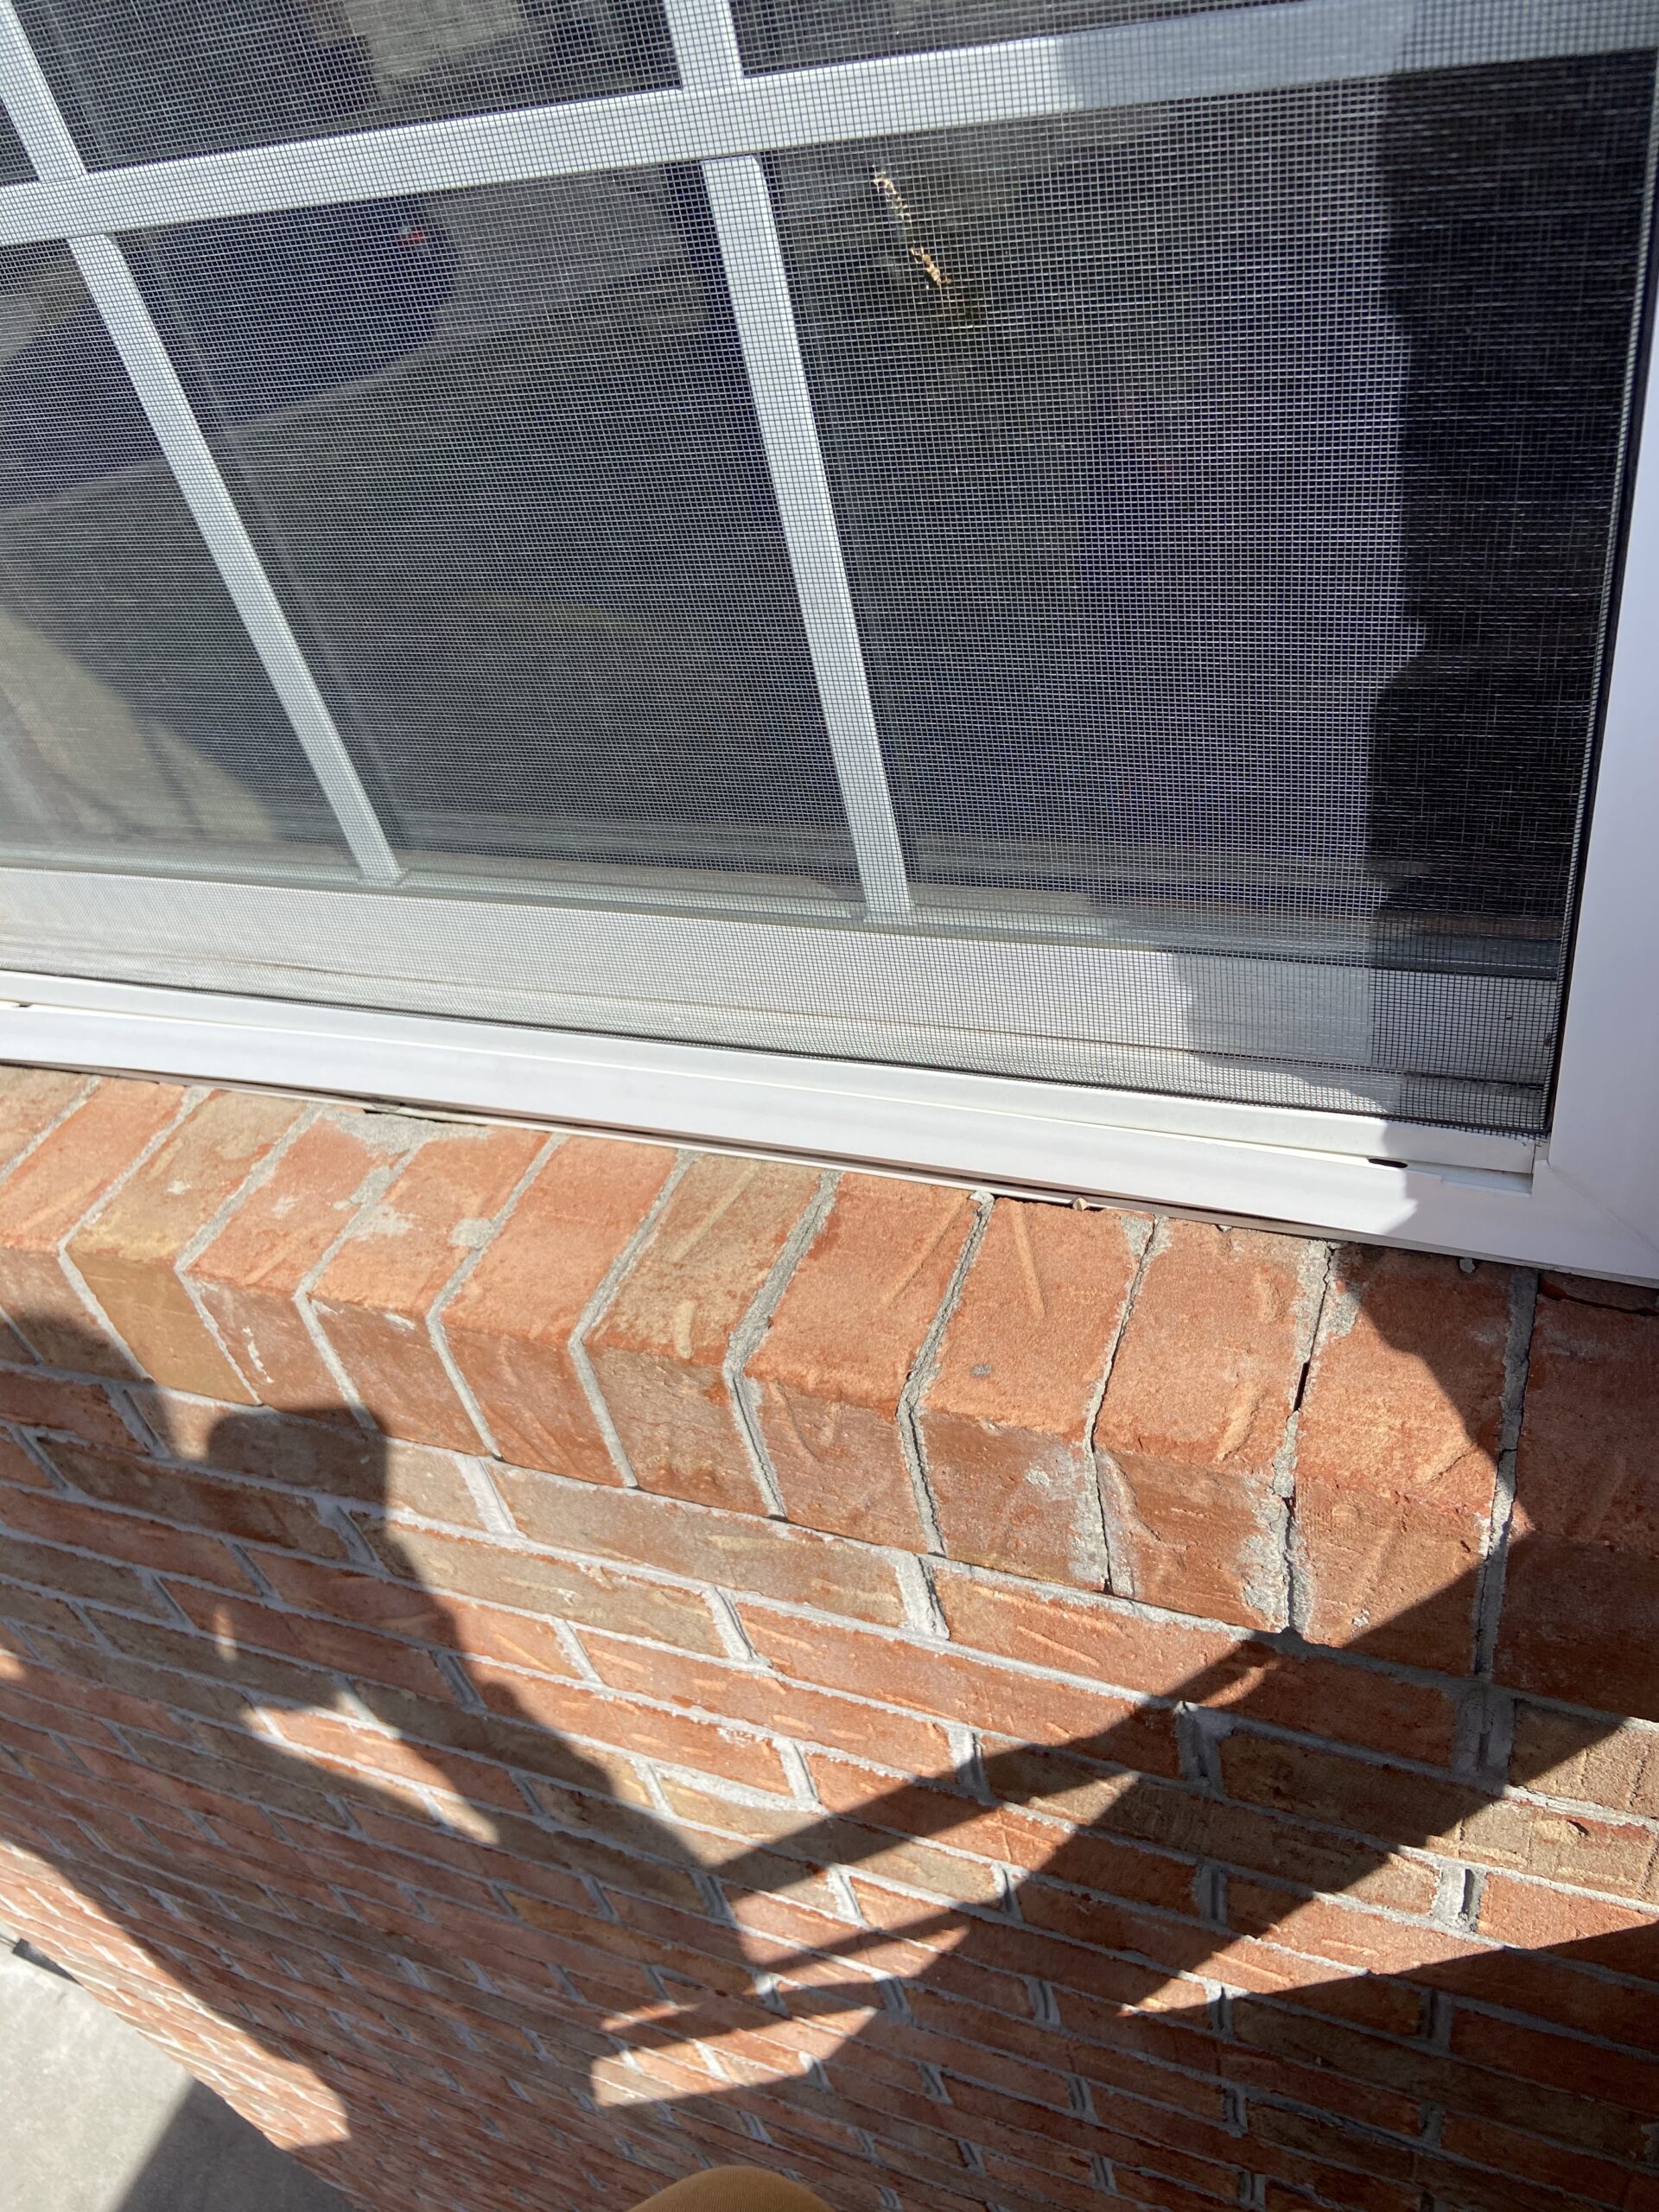 This is a picture of gaps between a window and brick siding that can cause Leaks